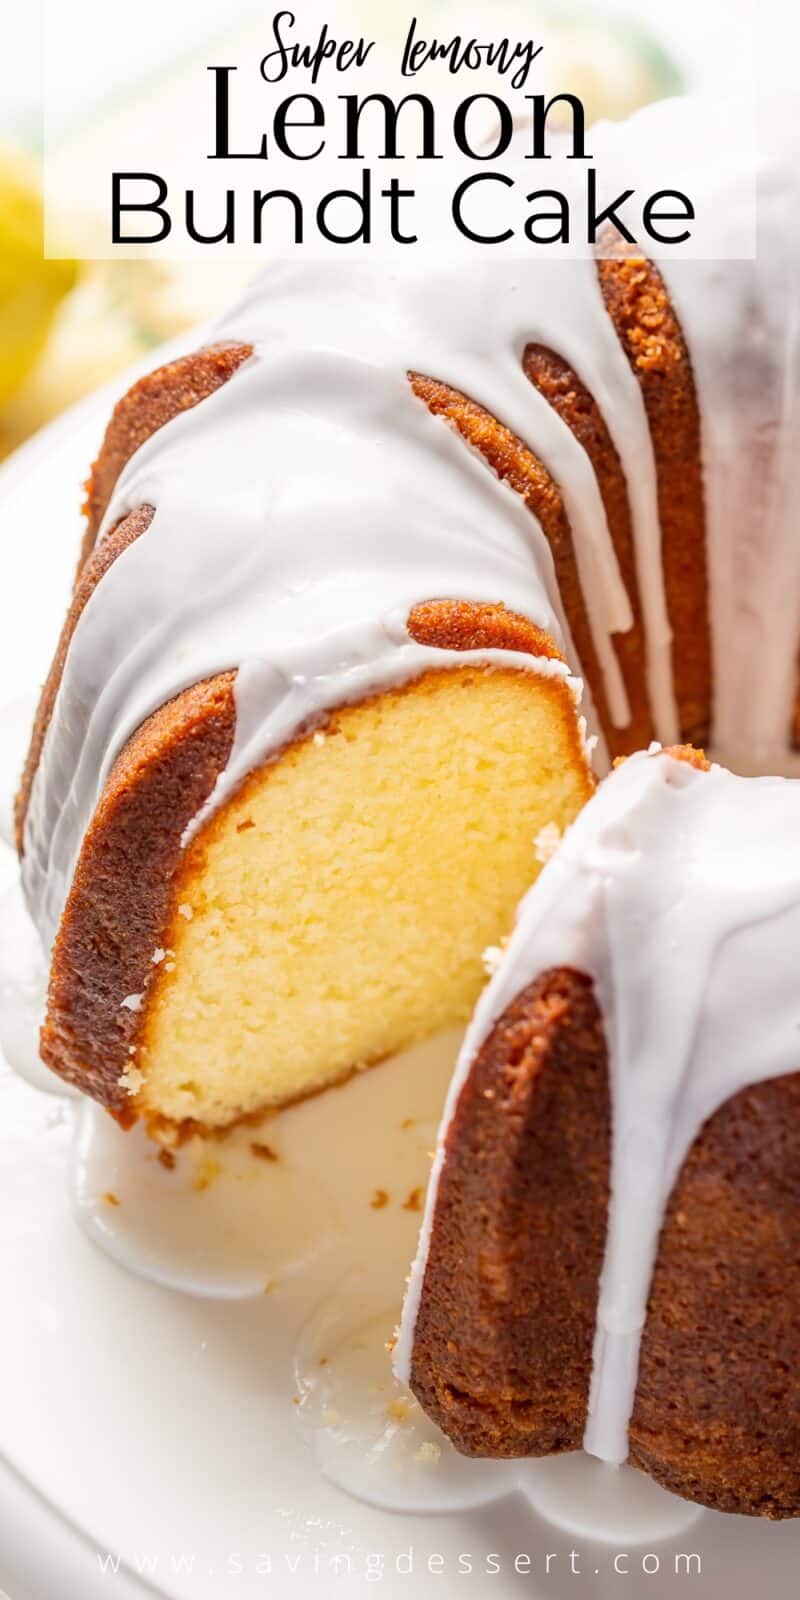 A side view of a sliced lemon bundt cake drizzled with lemon icing